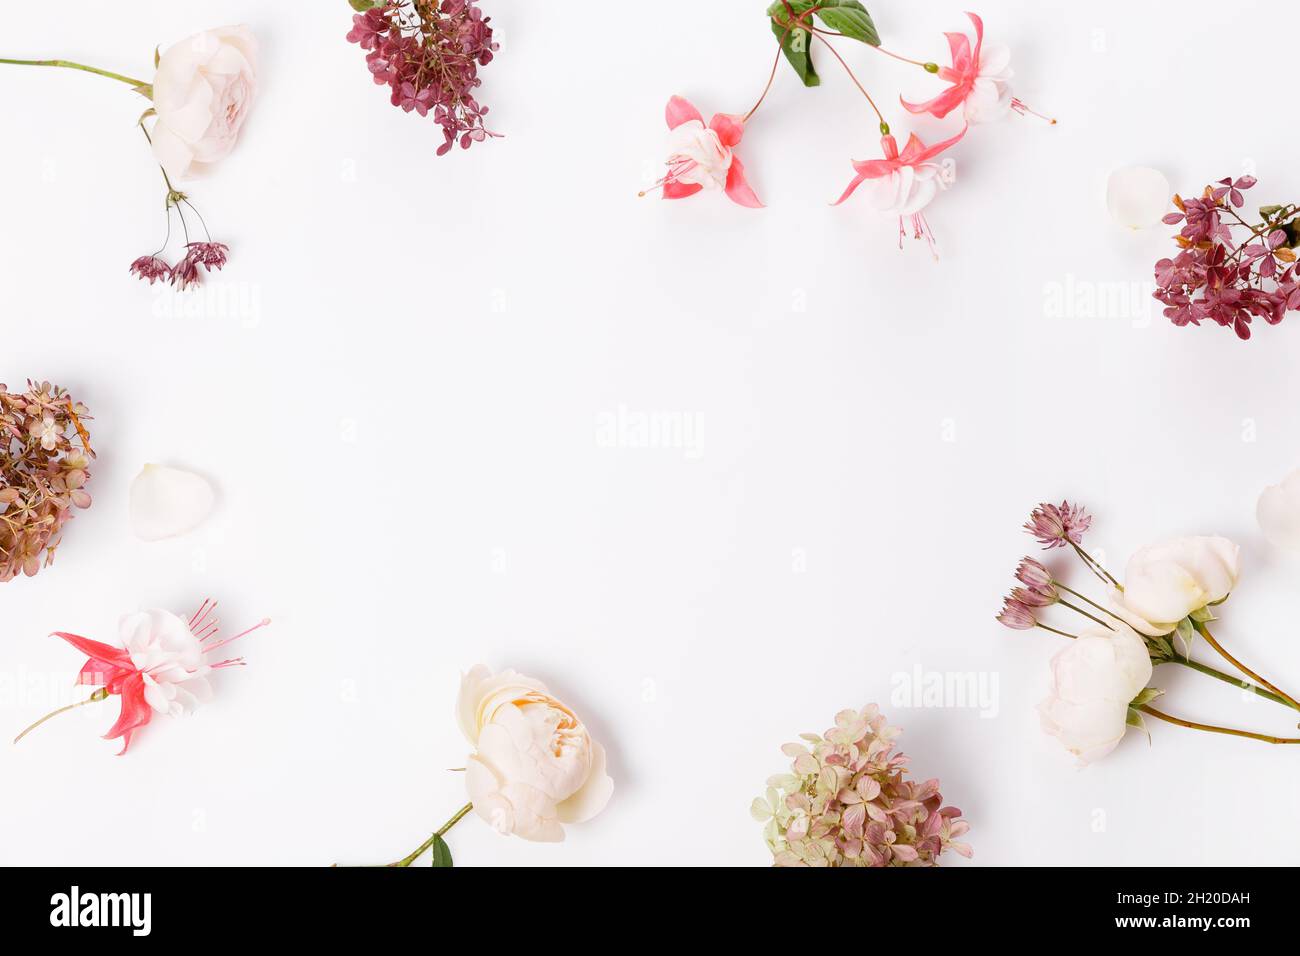 Autumn flowers composition. Frame made of pink rose, hydrangea flowers on white gray background. Flat lay Stock Photo